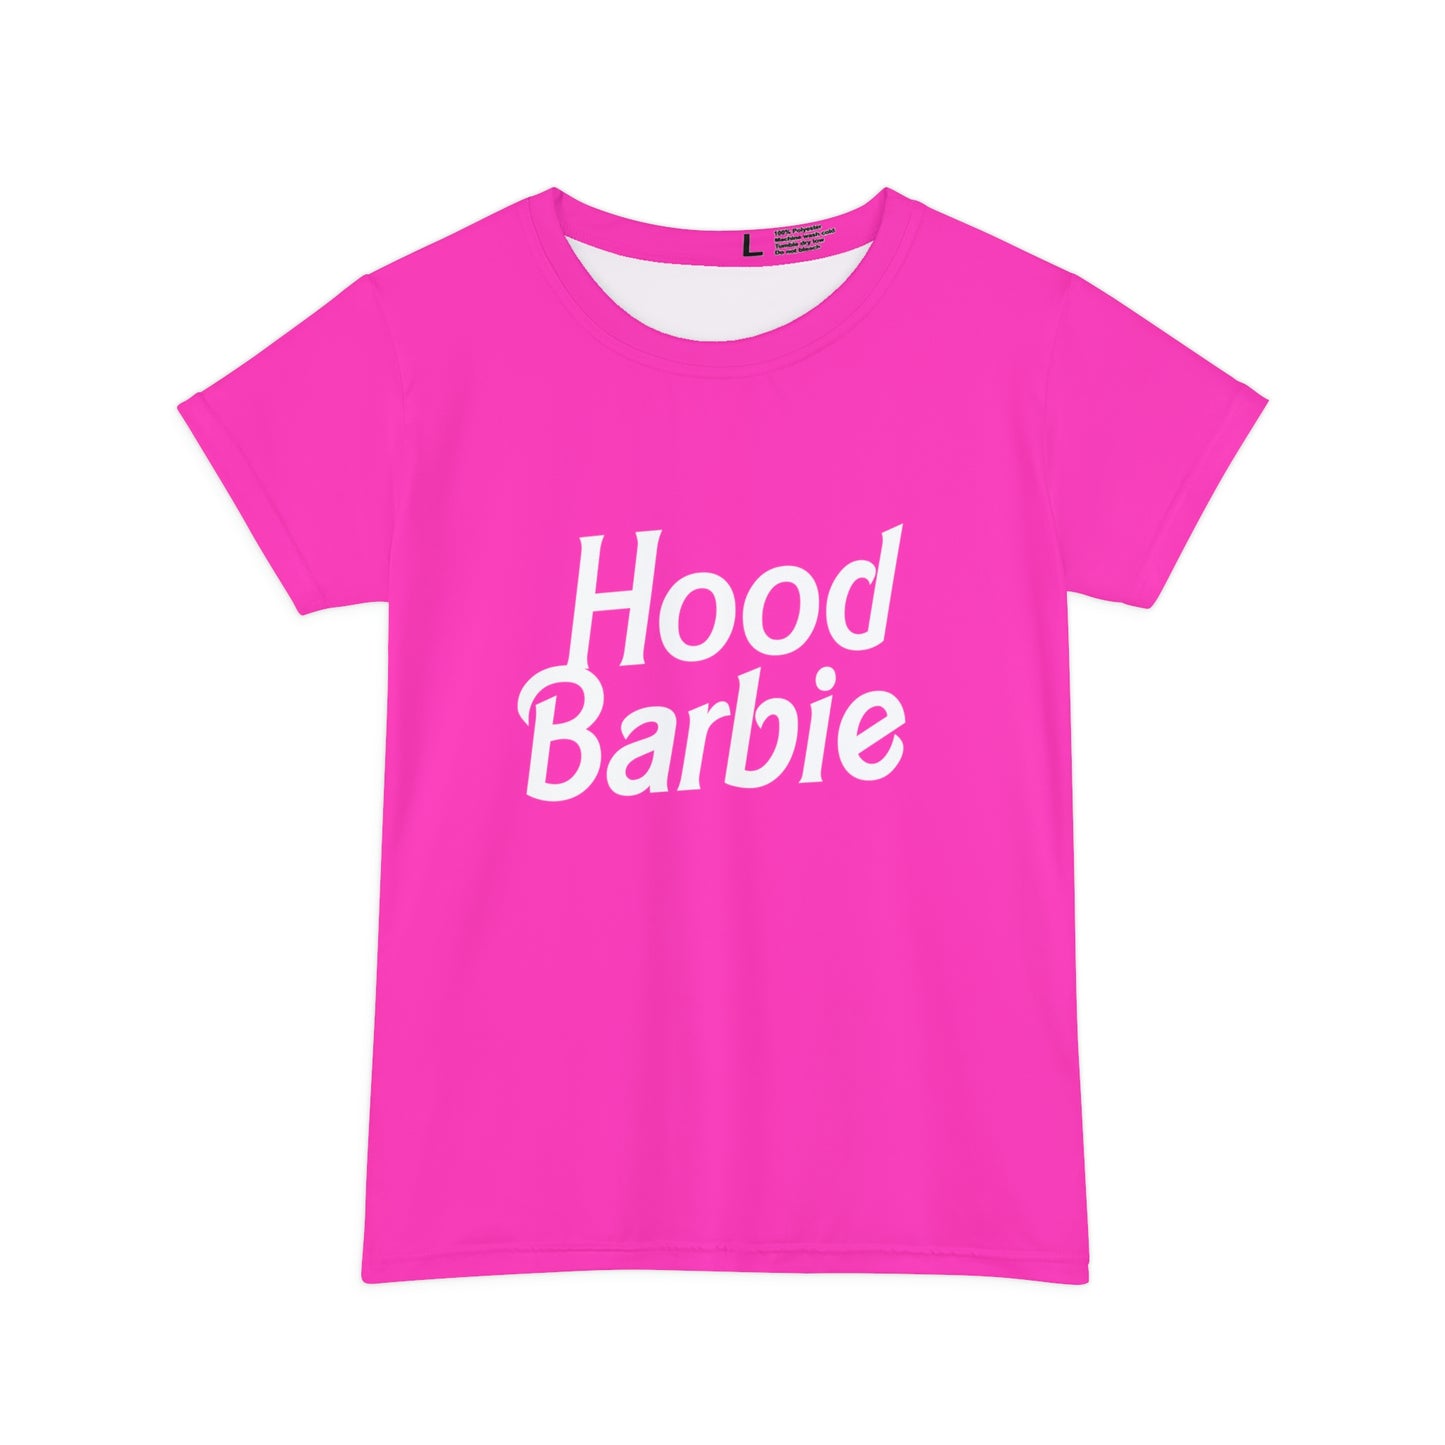 Hood Barbie, Bachelorette Party Shirts, Bridesmaid Gifts, Here comes the Party Tees, Group Party Favor Shirts, Bridal Party Shirt for women